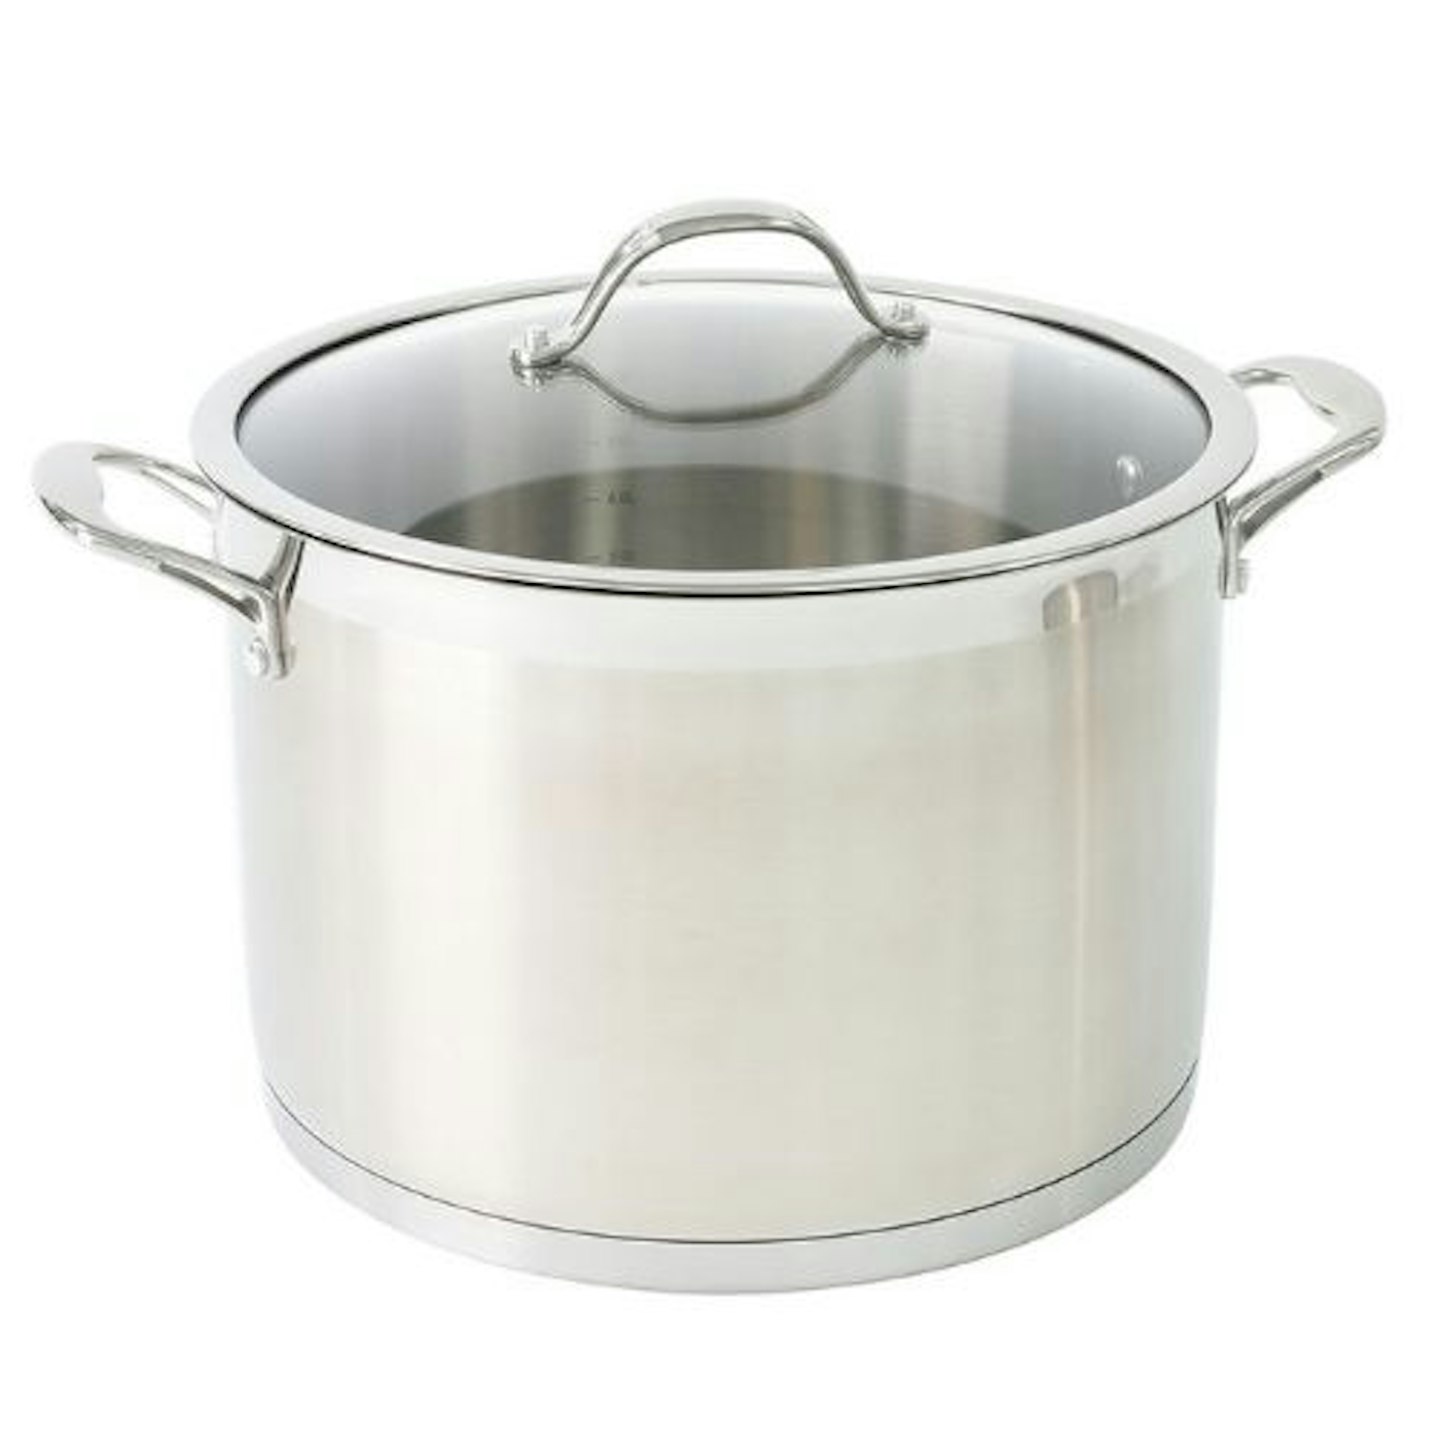 HOMICHEF 16 Quart LARGE Stock Pot with Glass Lid - NICKEL FREE Stainless  Steel Healthy Cookware Stockpots with Lids 16 Quart - Mirror Polished